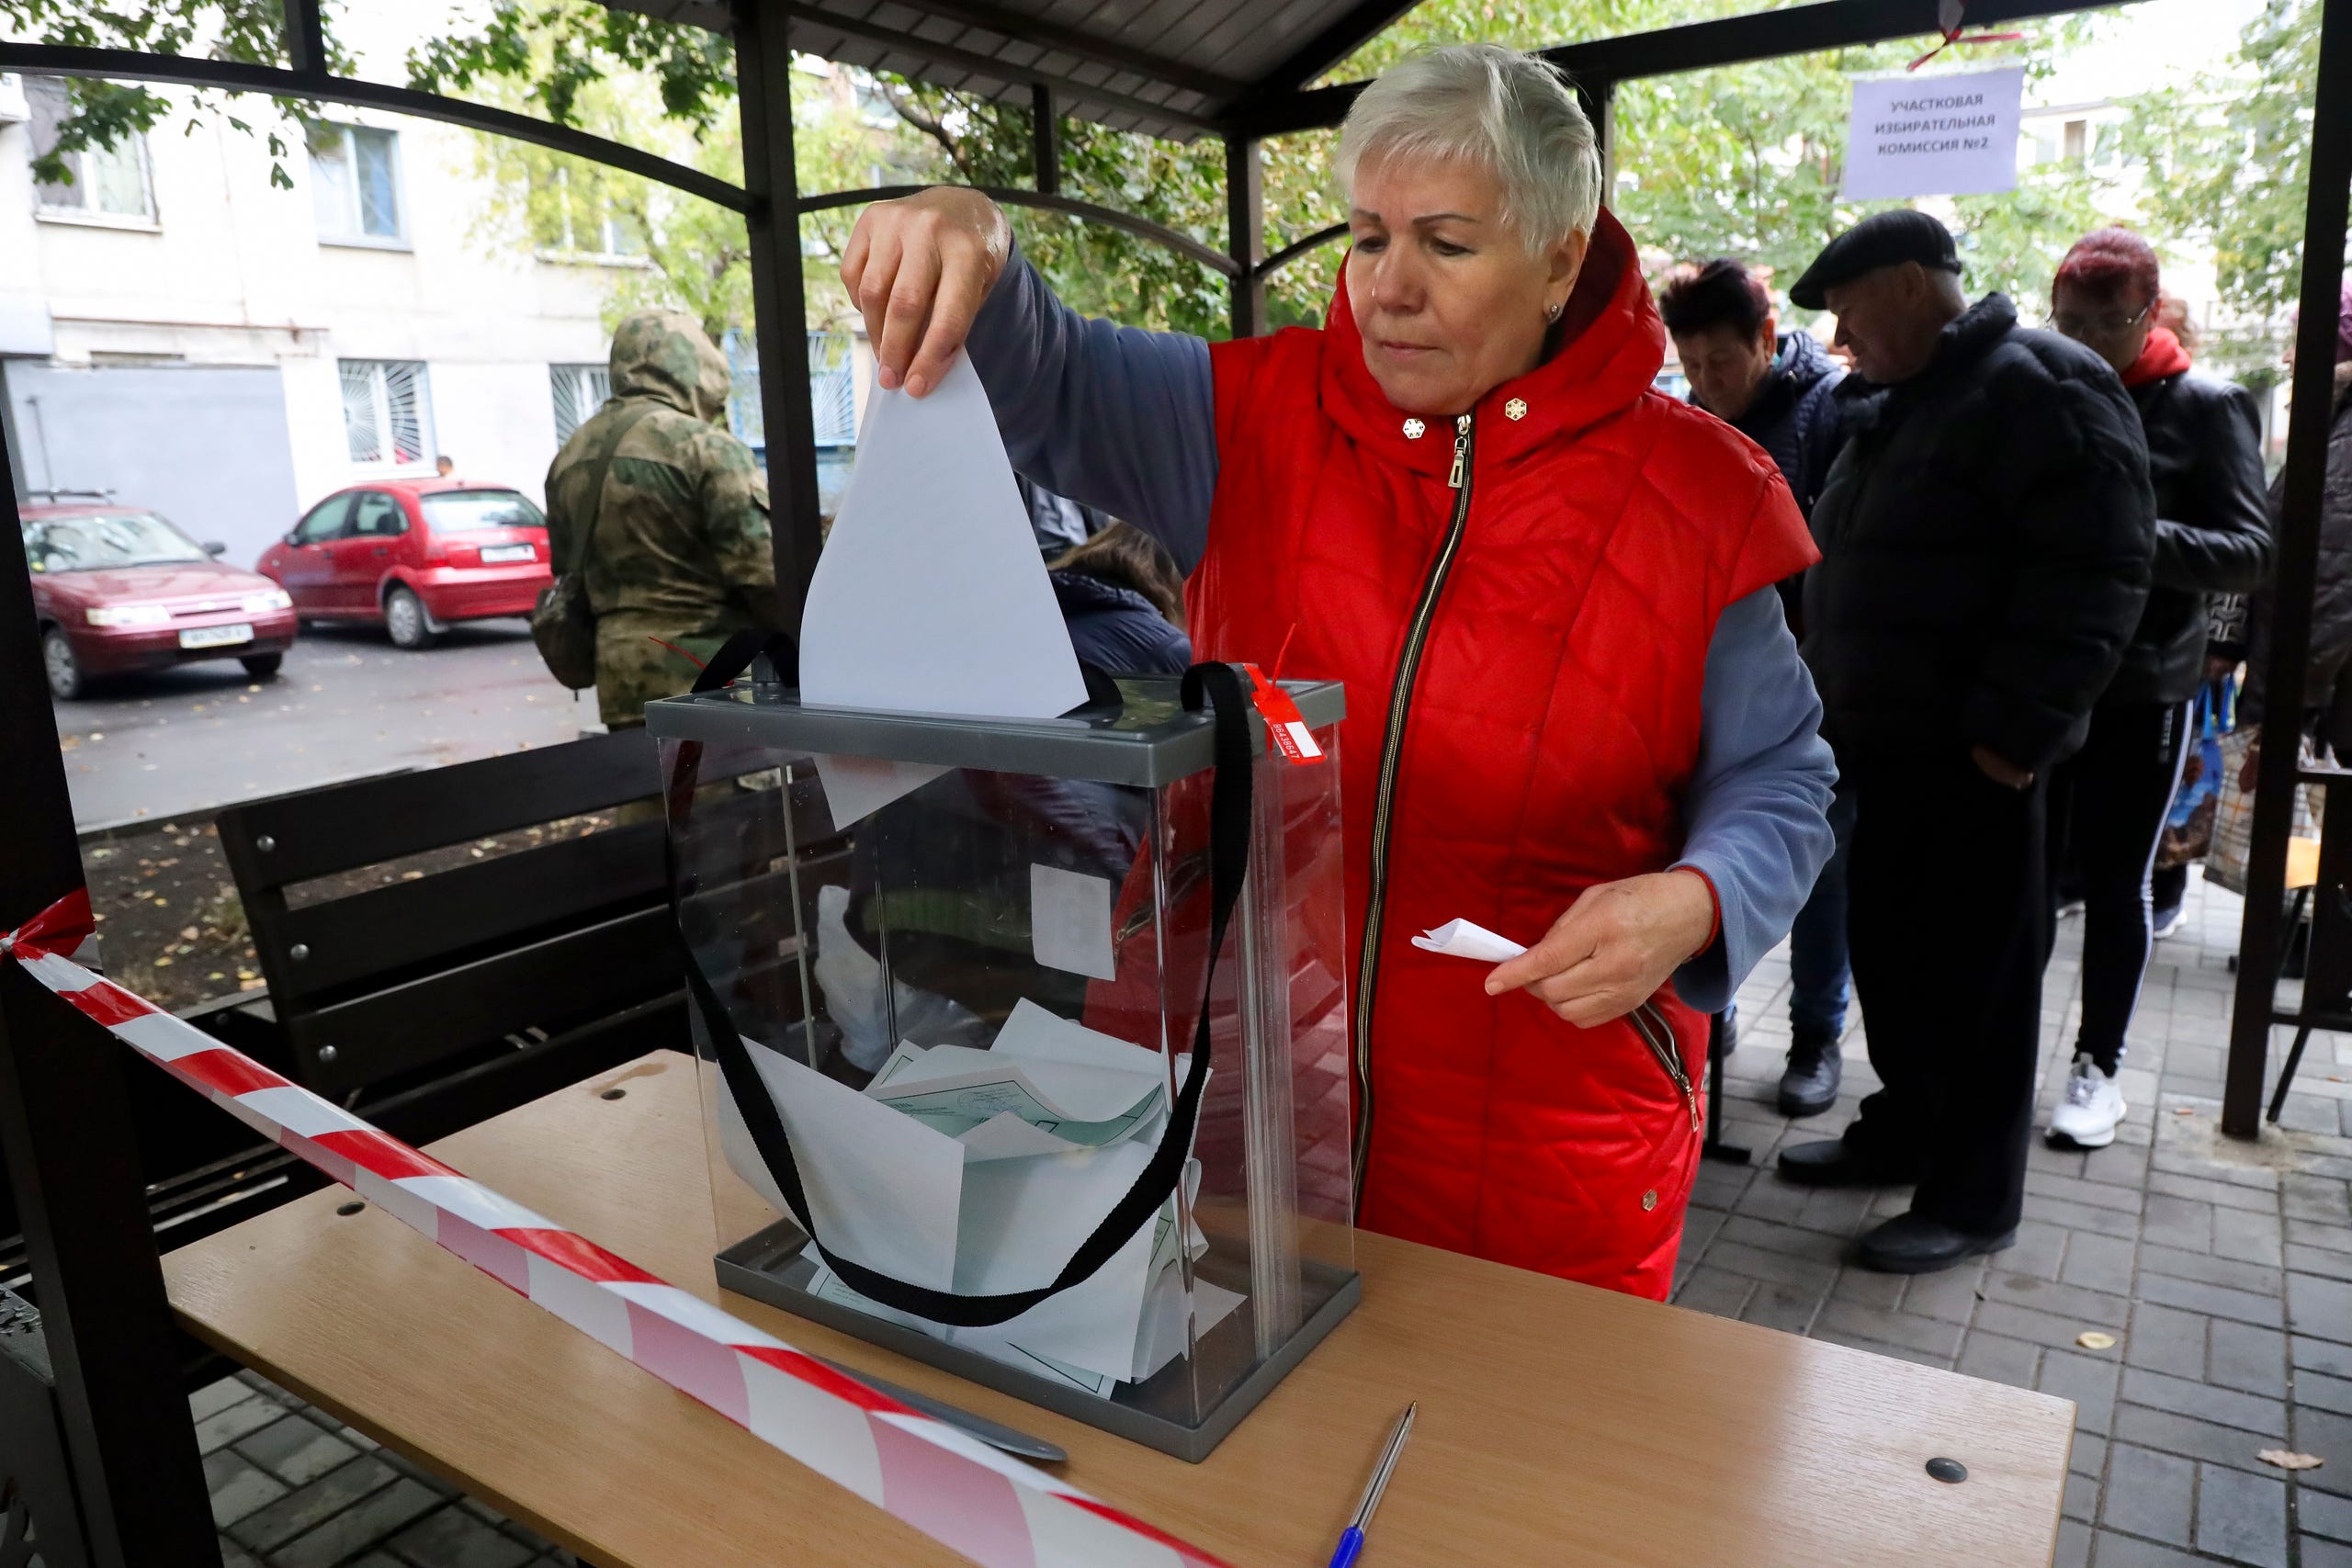 A woman votes during a referendum in a mobile polling station in Mariupol, Donetsk People's Republic, controlled by Russia-backed separatists, eastern Ukraine, Friday, Sept. 23, 2022. Voting began Friday in four Moscow-held regions of Ukraine on referendums to become part of Russia.